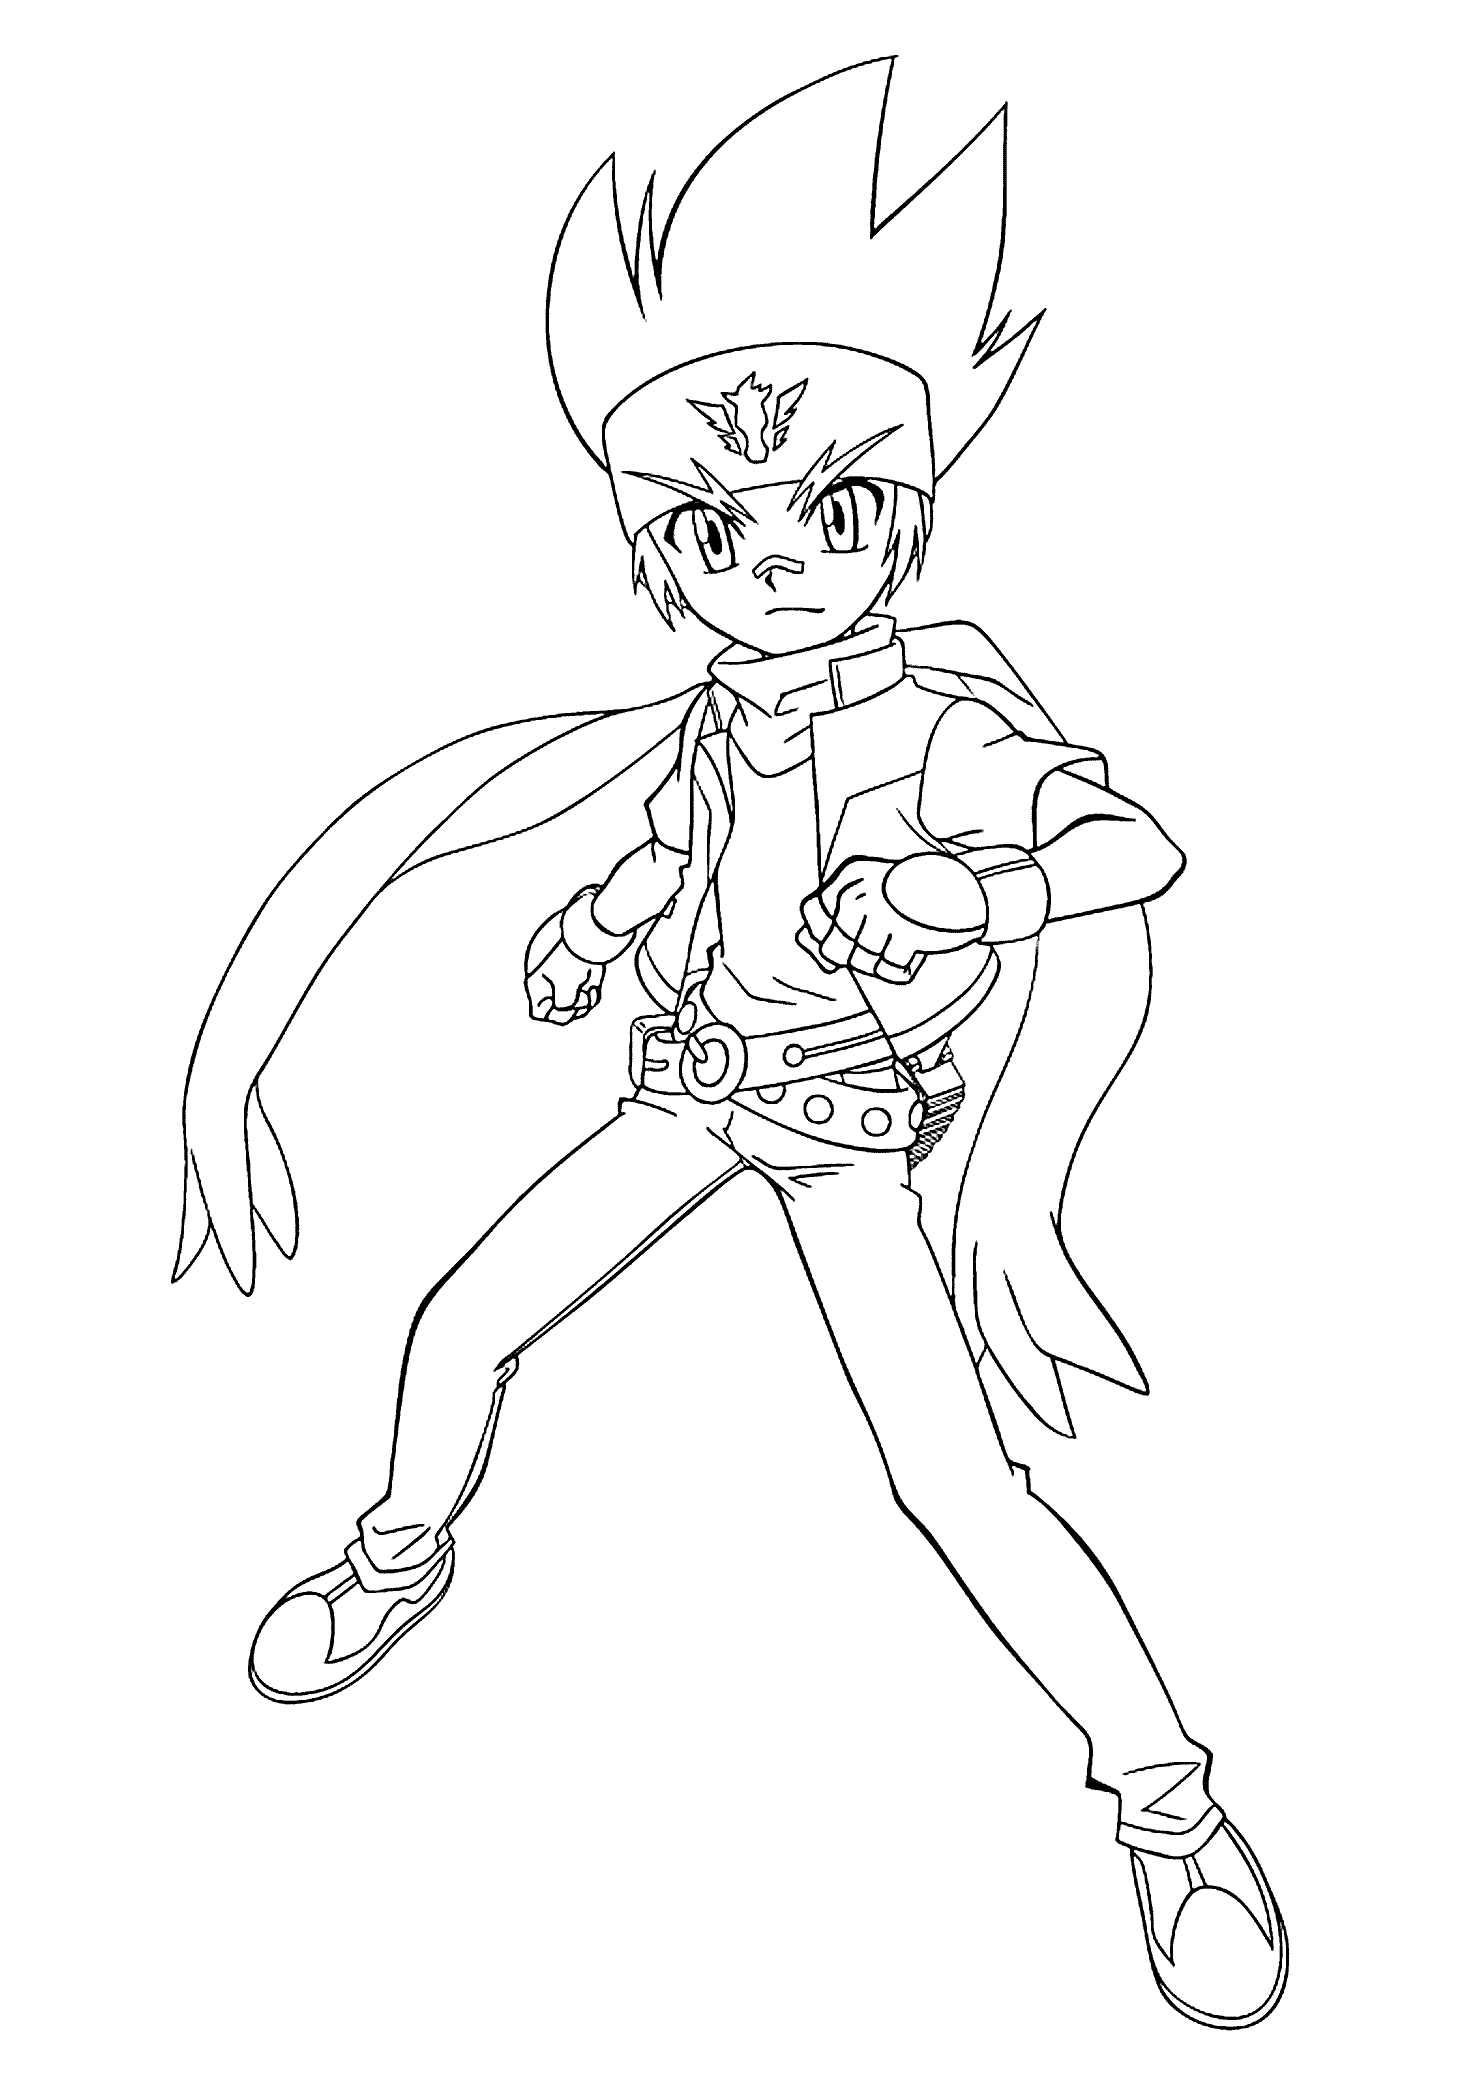 Gingka Beyblade Anime Coloring Pages For Kids Printable Free Coloring Pages Sunflower